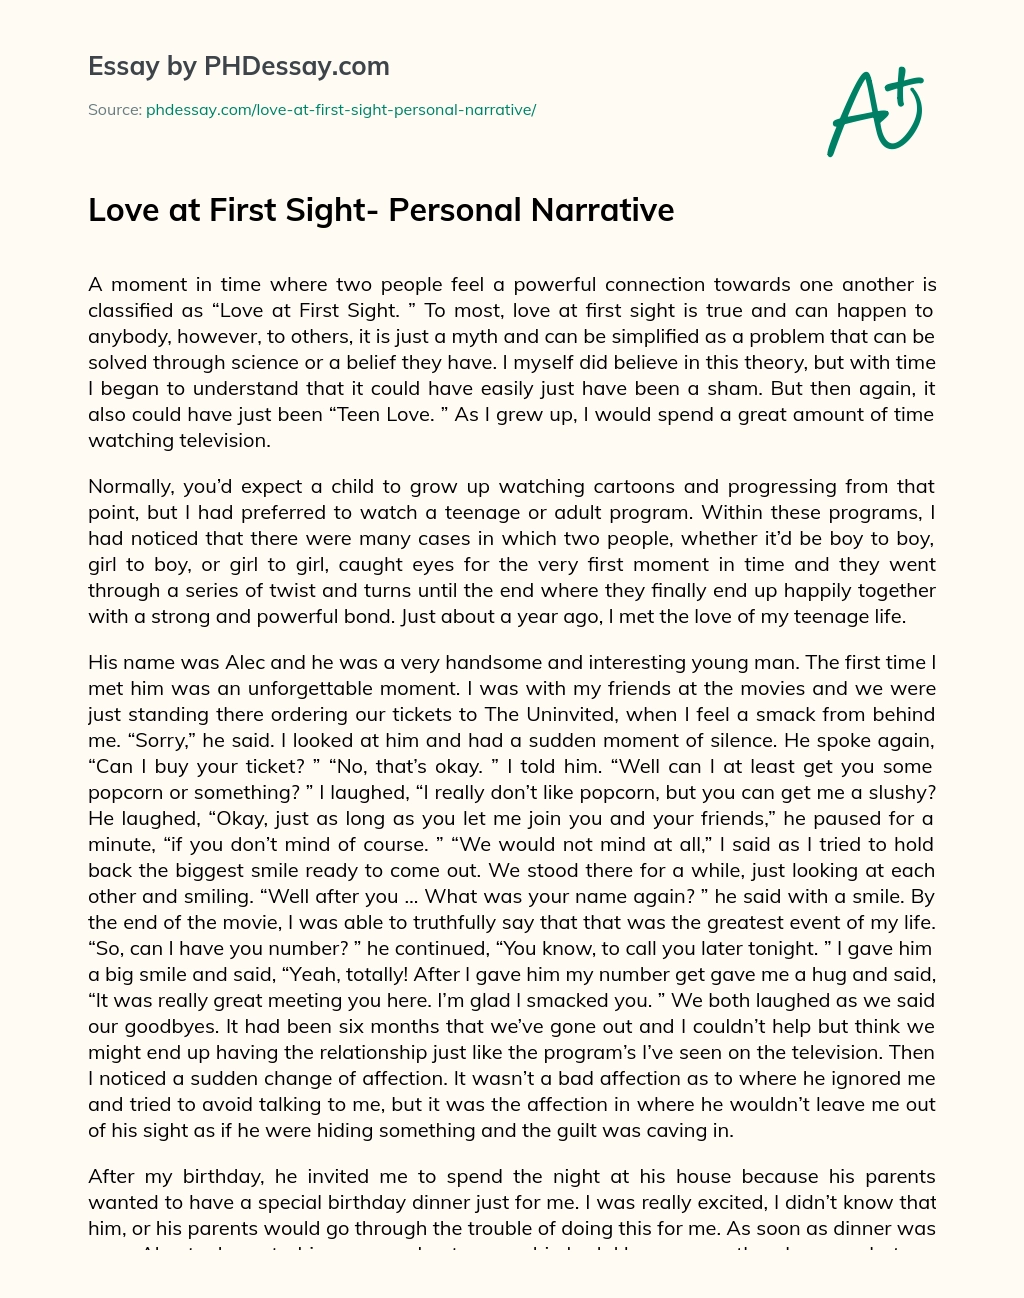 Love at First Sight- Personal Narrative